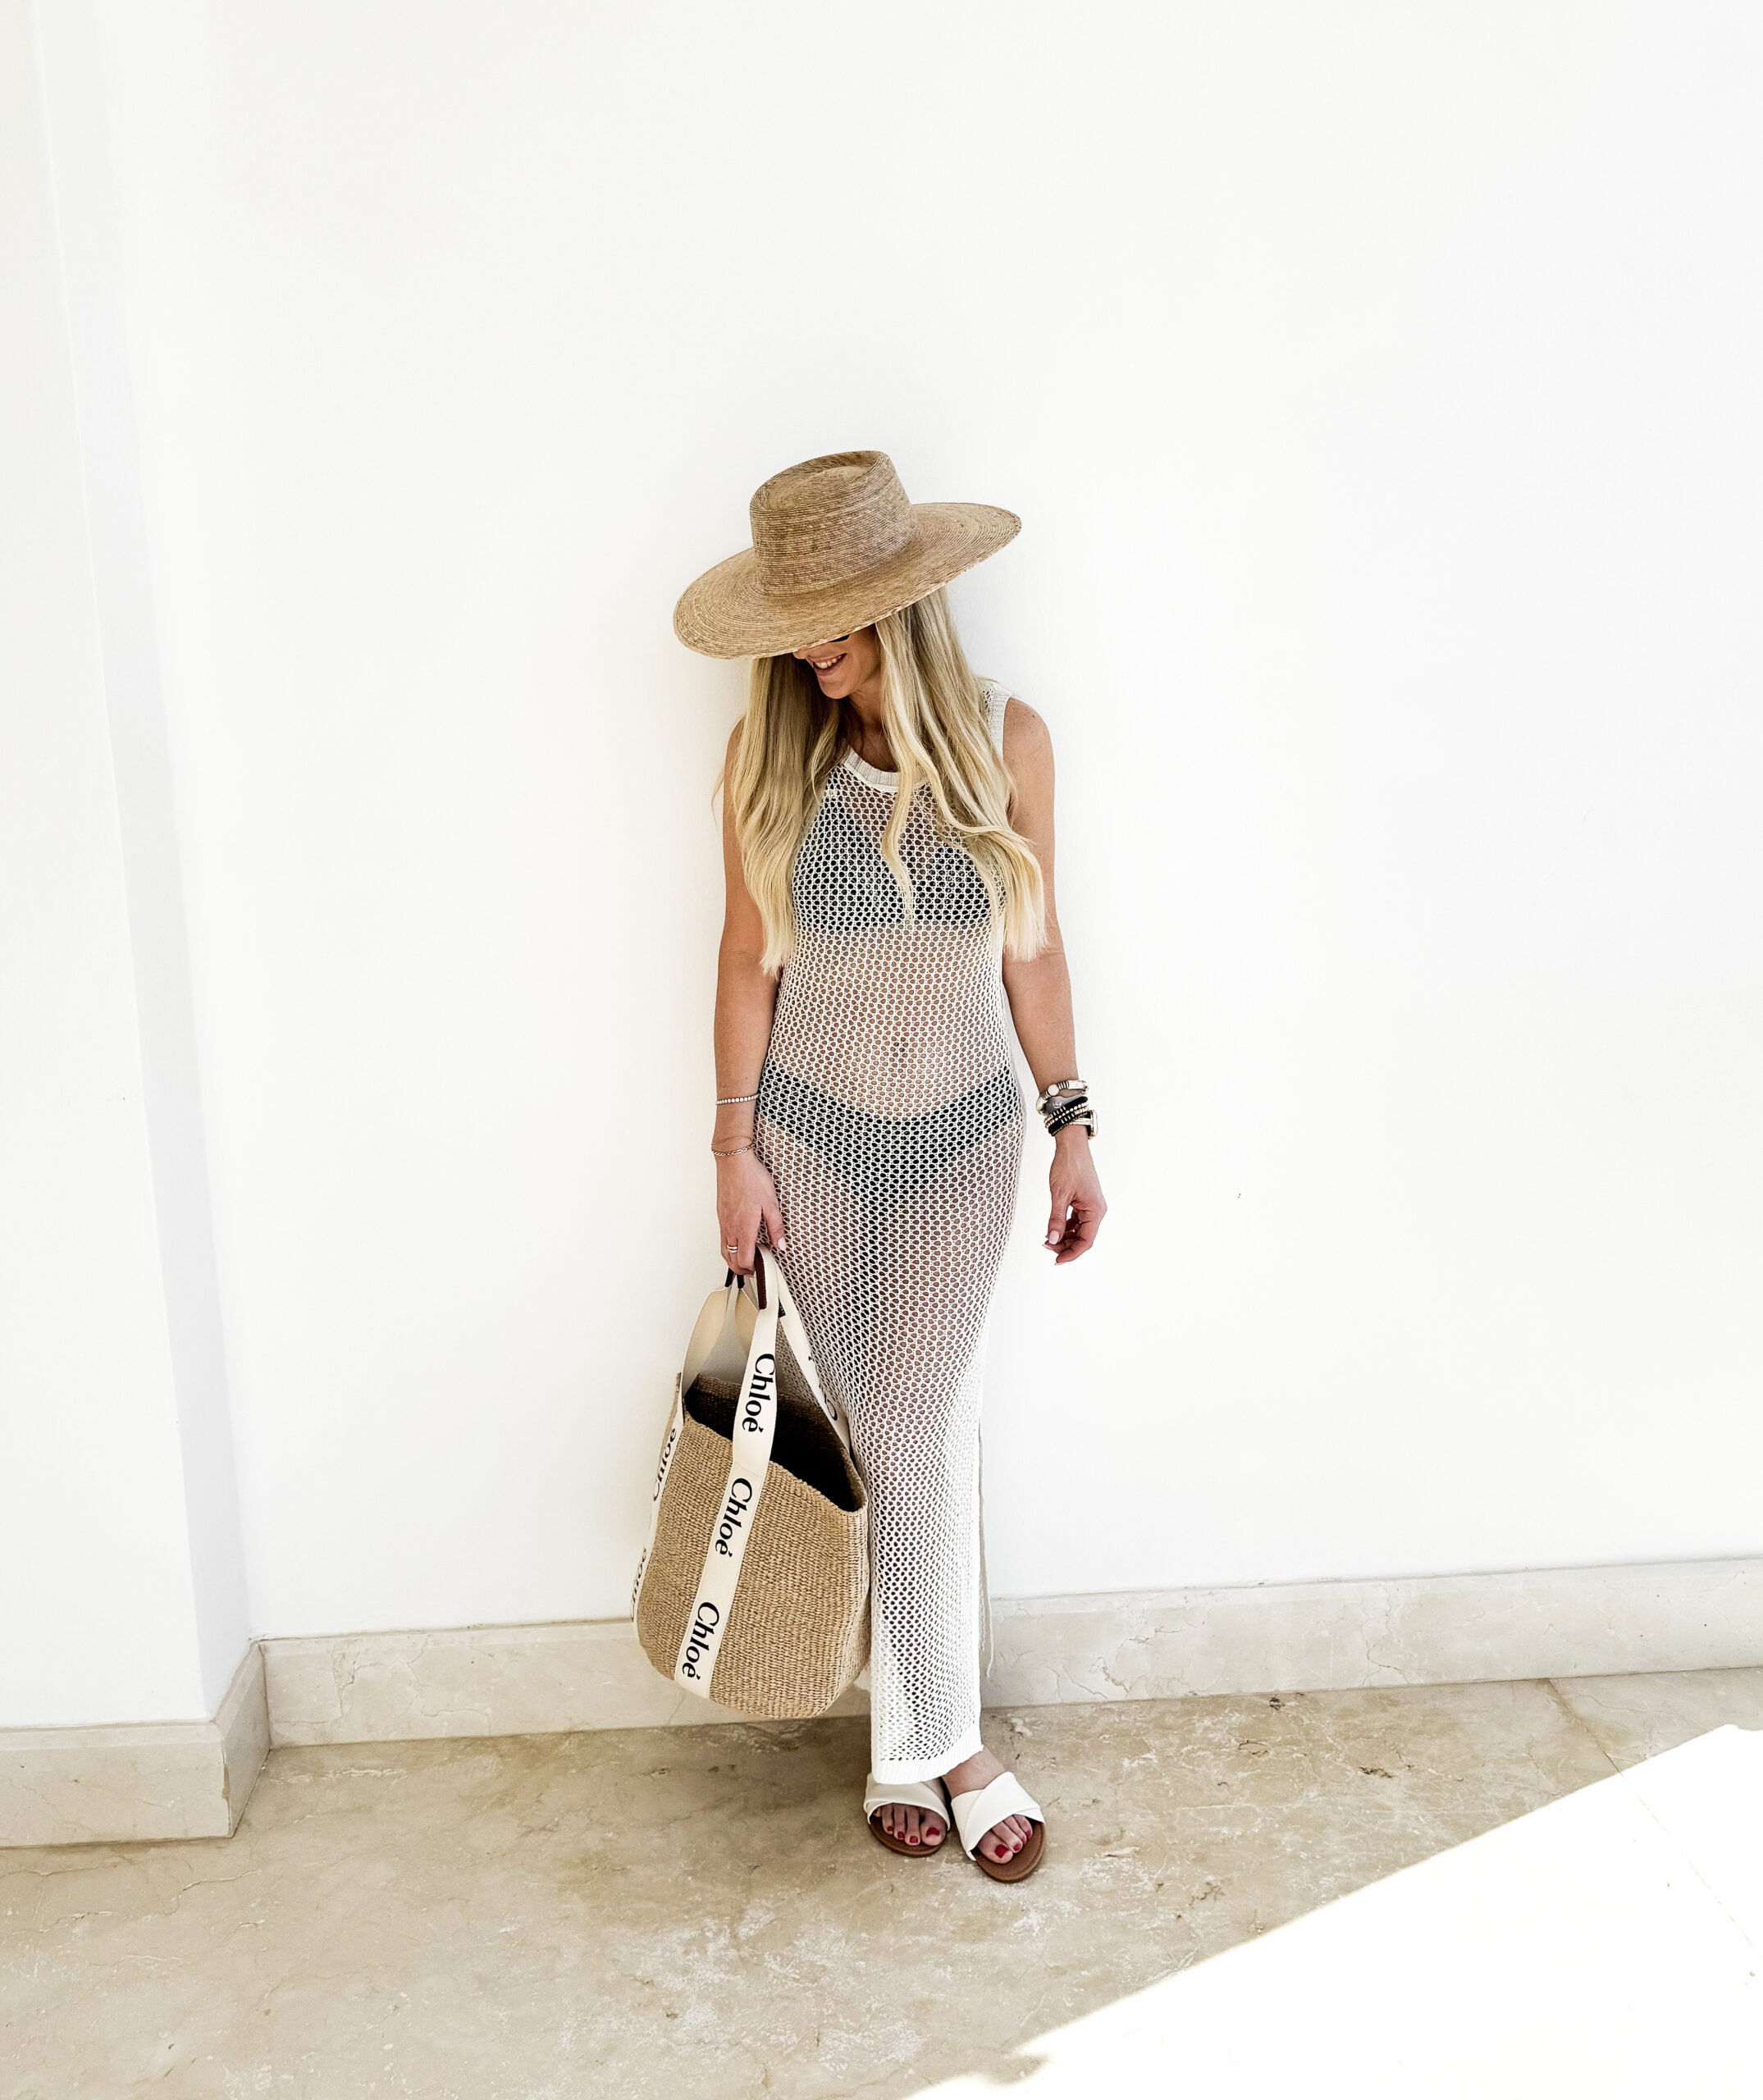 Come With Me to Cabo | Cabo, Mexico, vacation, vacation outfits, vacation style, resort wear, resort style, swim, mesh dress, cover up, sandals, neutral fashion, sun hat, bracelets, two piece swim